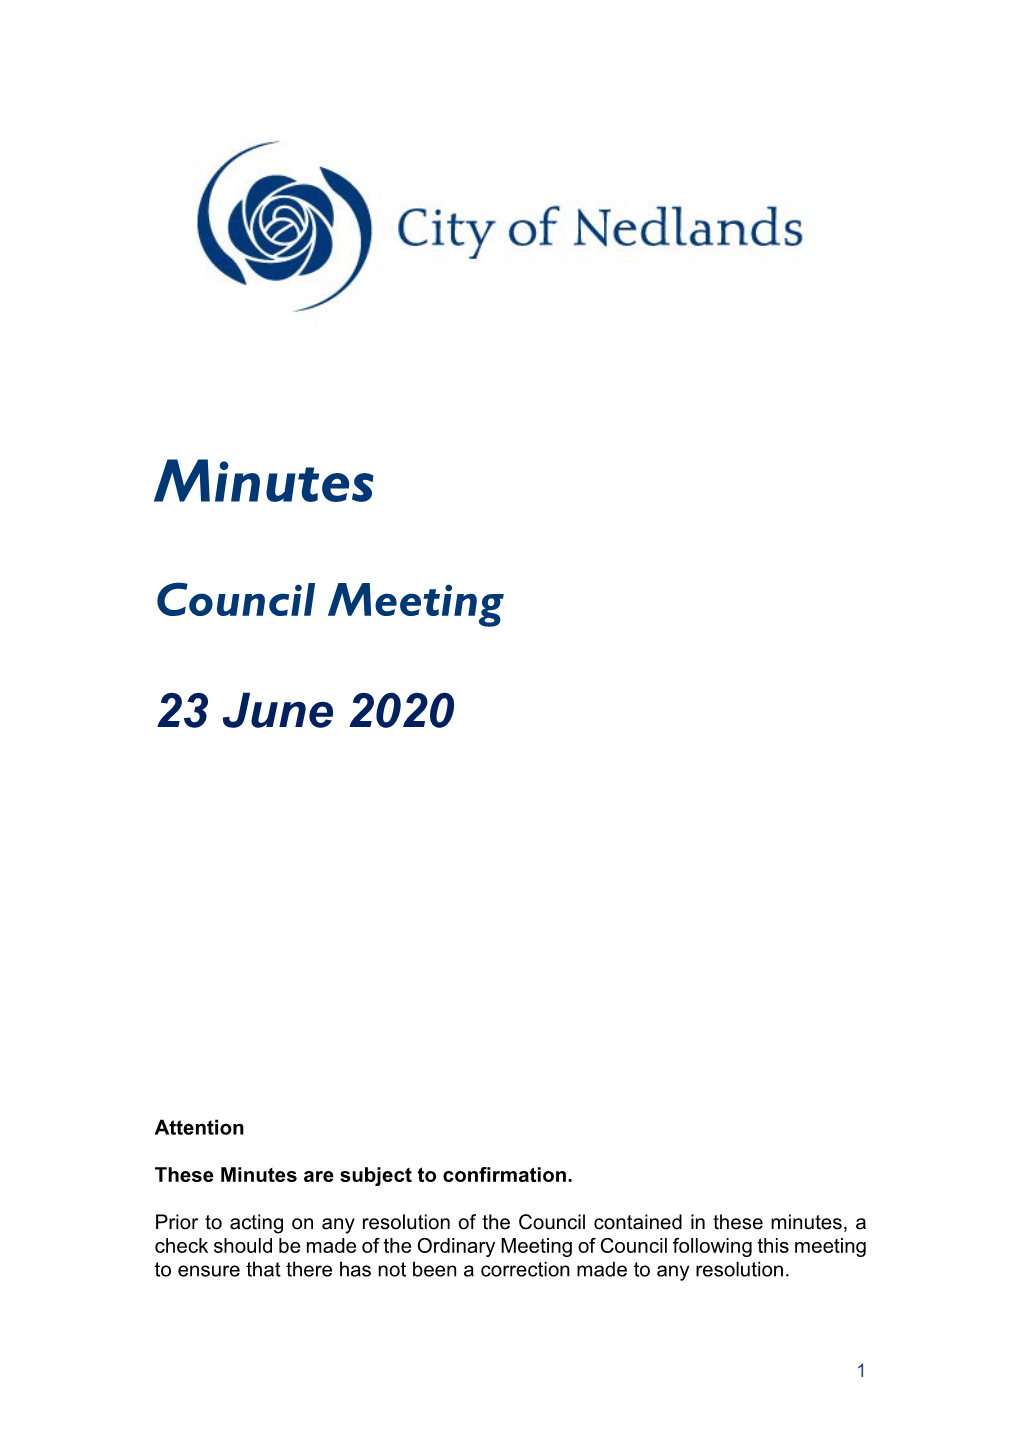 2020 Council Meeting Minutes